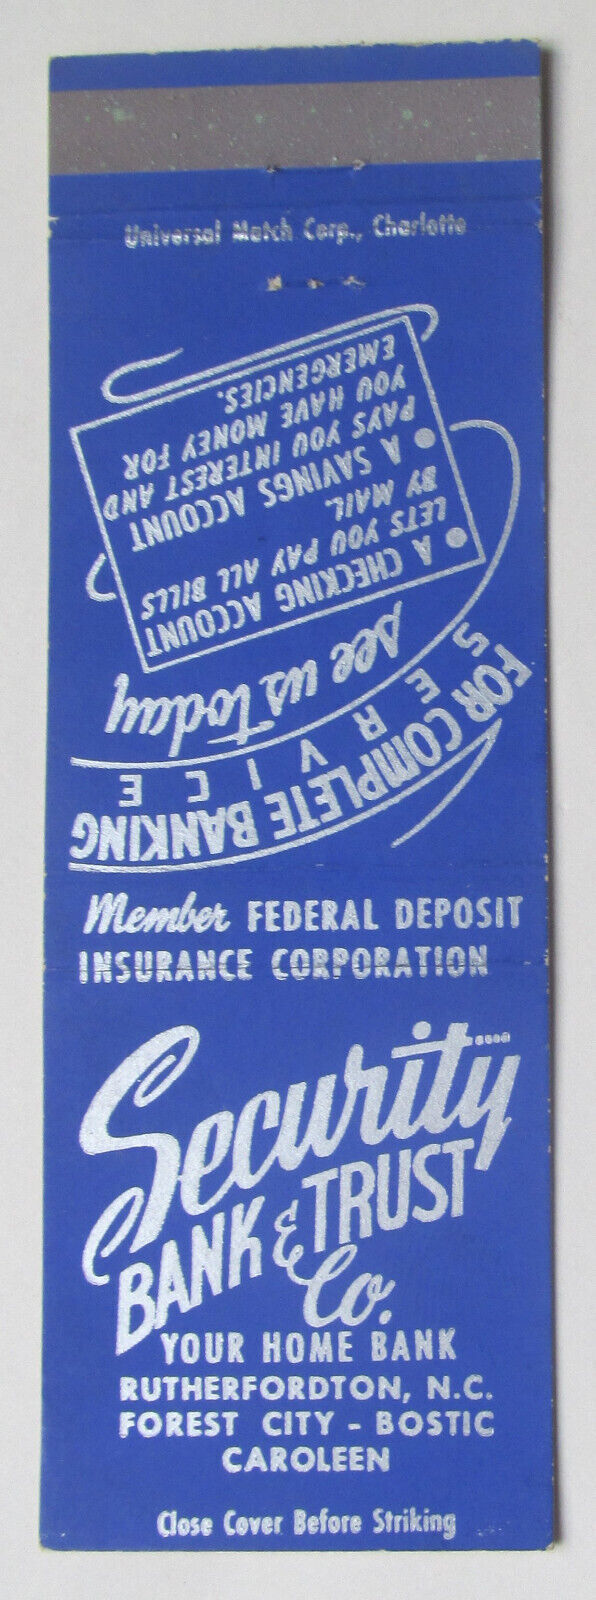 Security Bank & Trust Co. - Rutherfordton, North Carolina 20FS Matchbook Cover